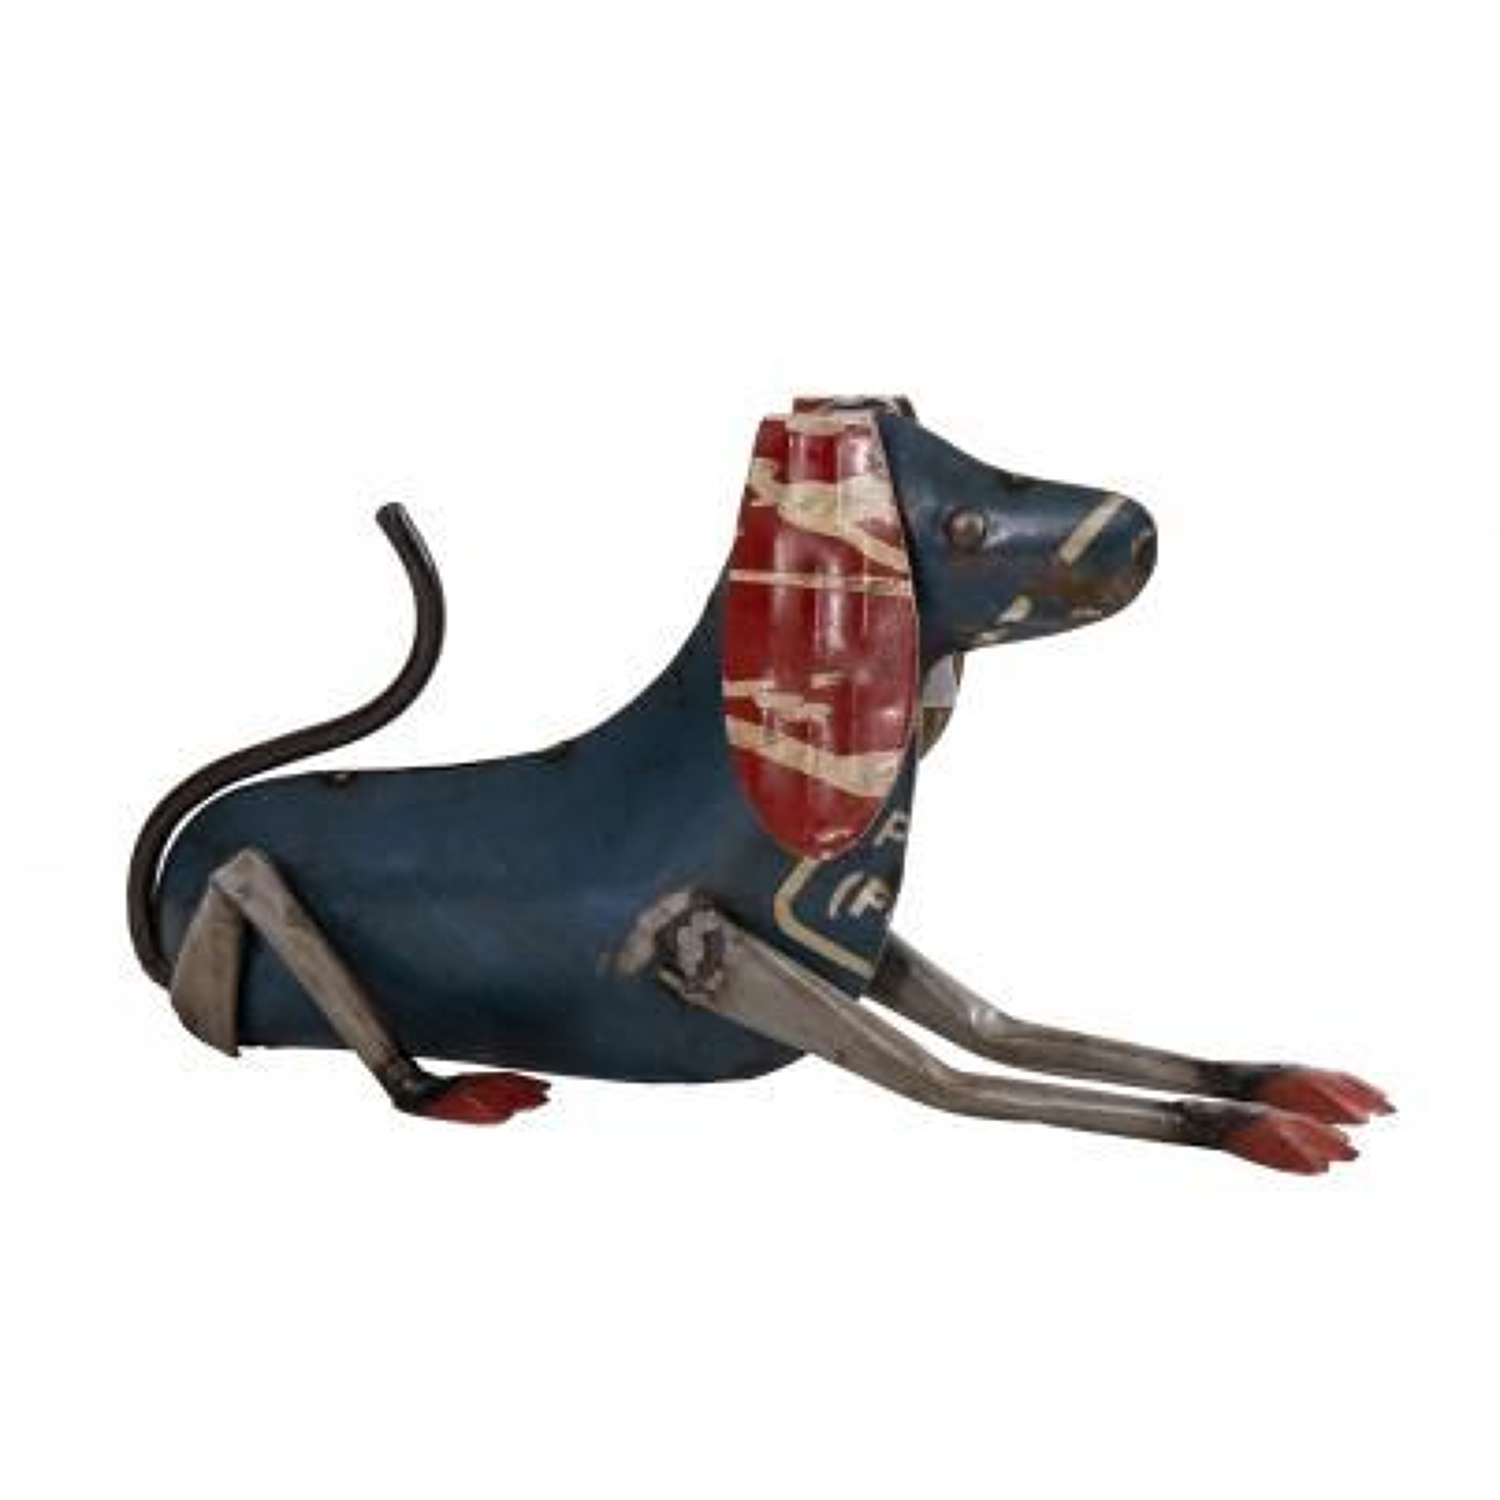 Recycled Iron Dog. Ref MH-5805